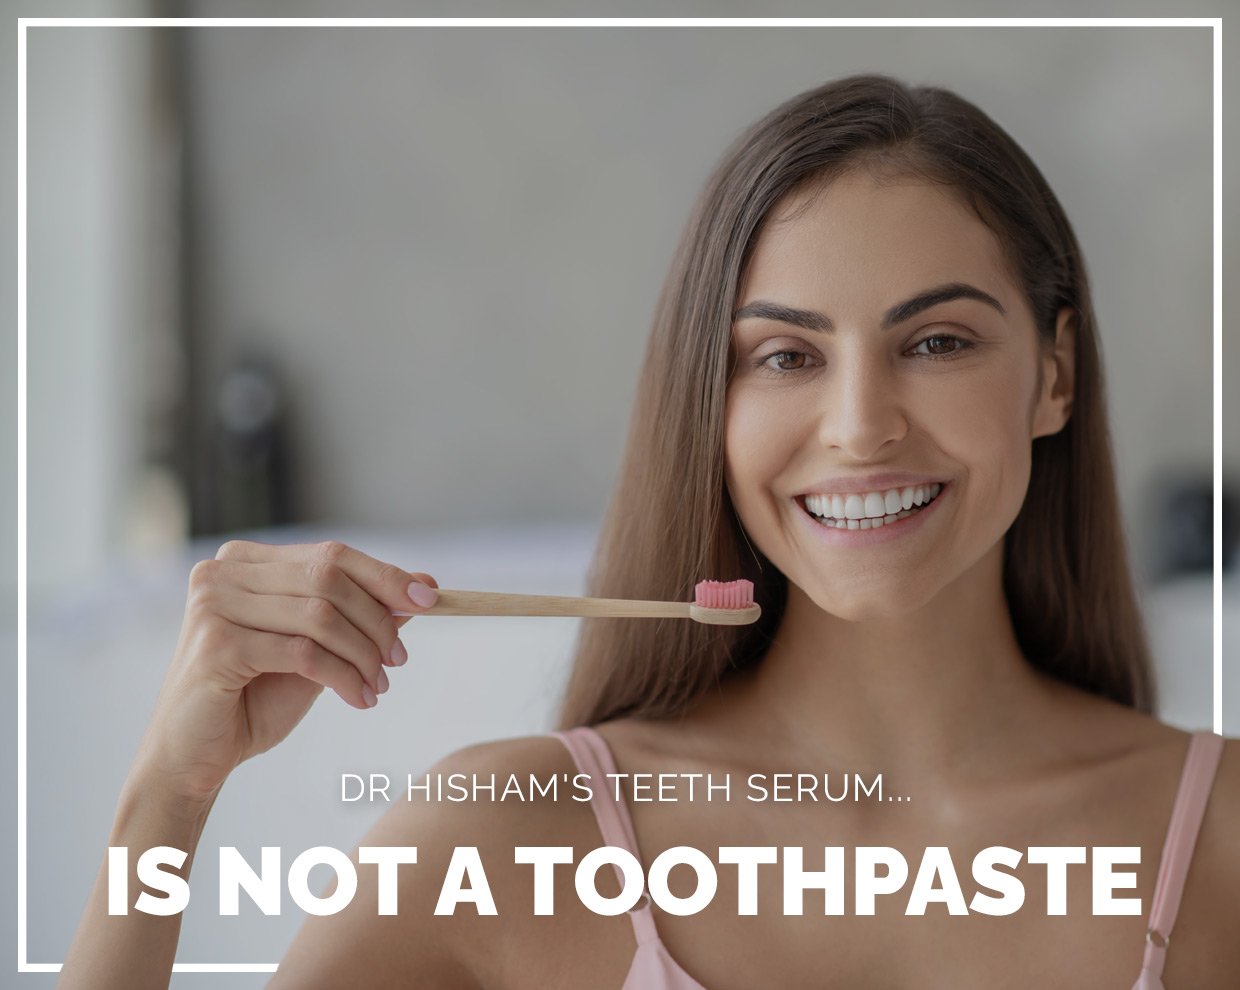 Why Dr Hisham's teeth serum is not a toothpaste? 